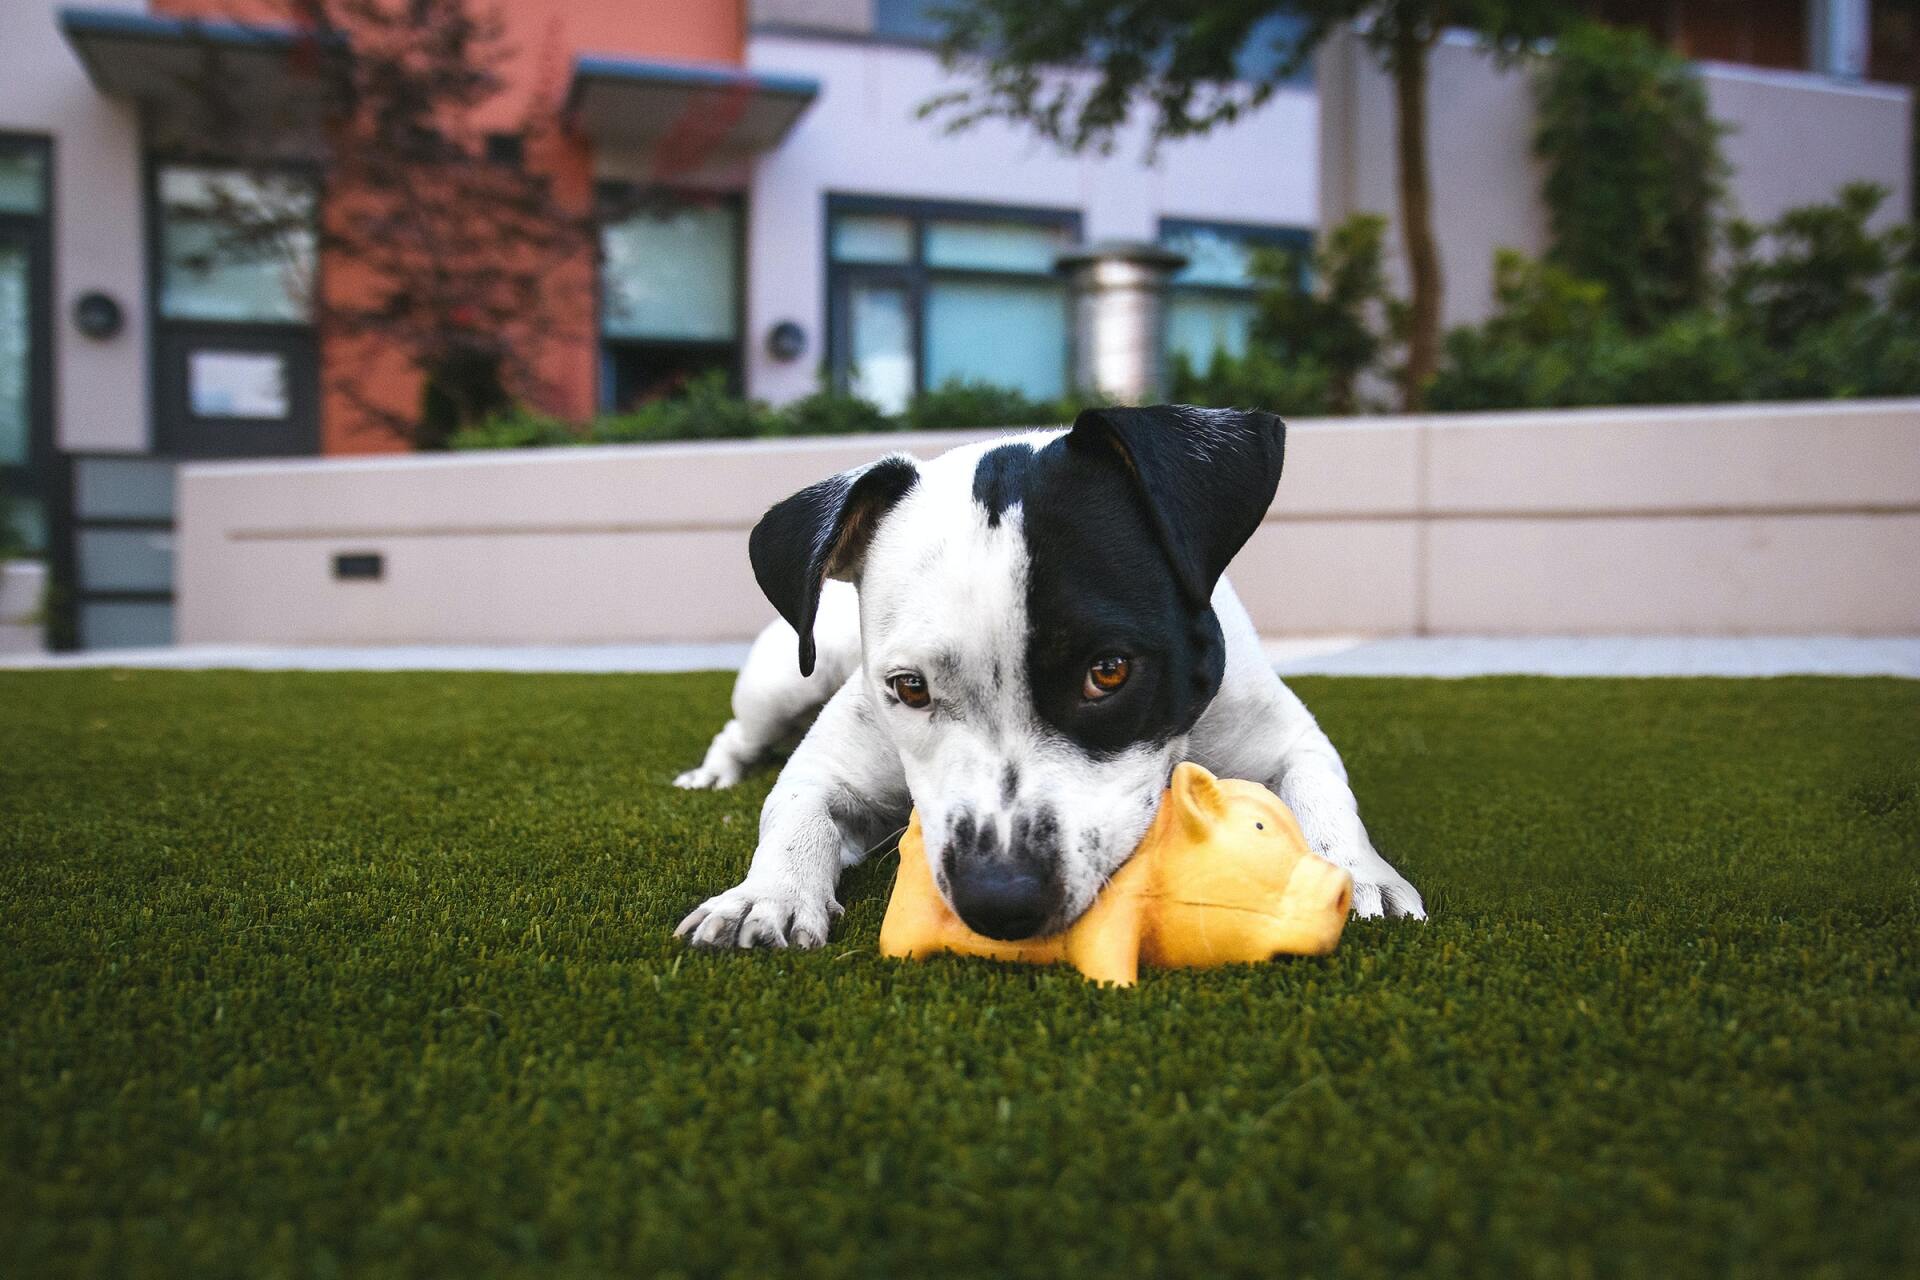 Surely, no play time is too crazy or too rough for this dog on this synthetic turf.